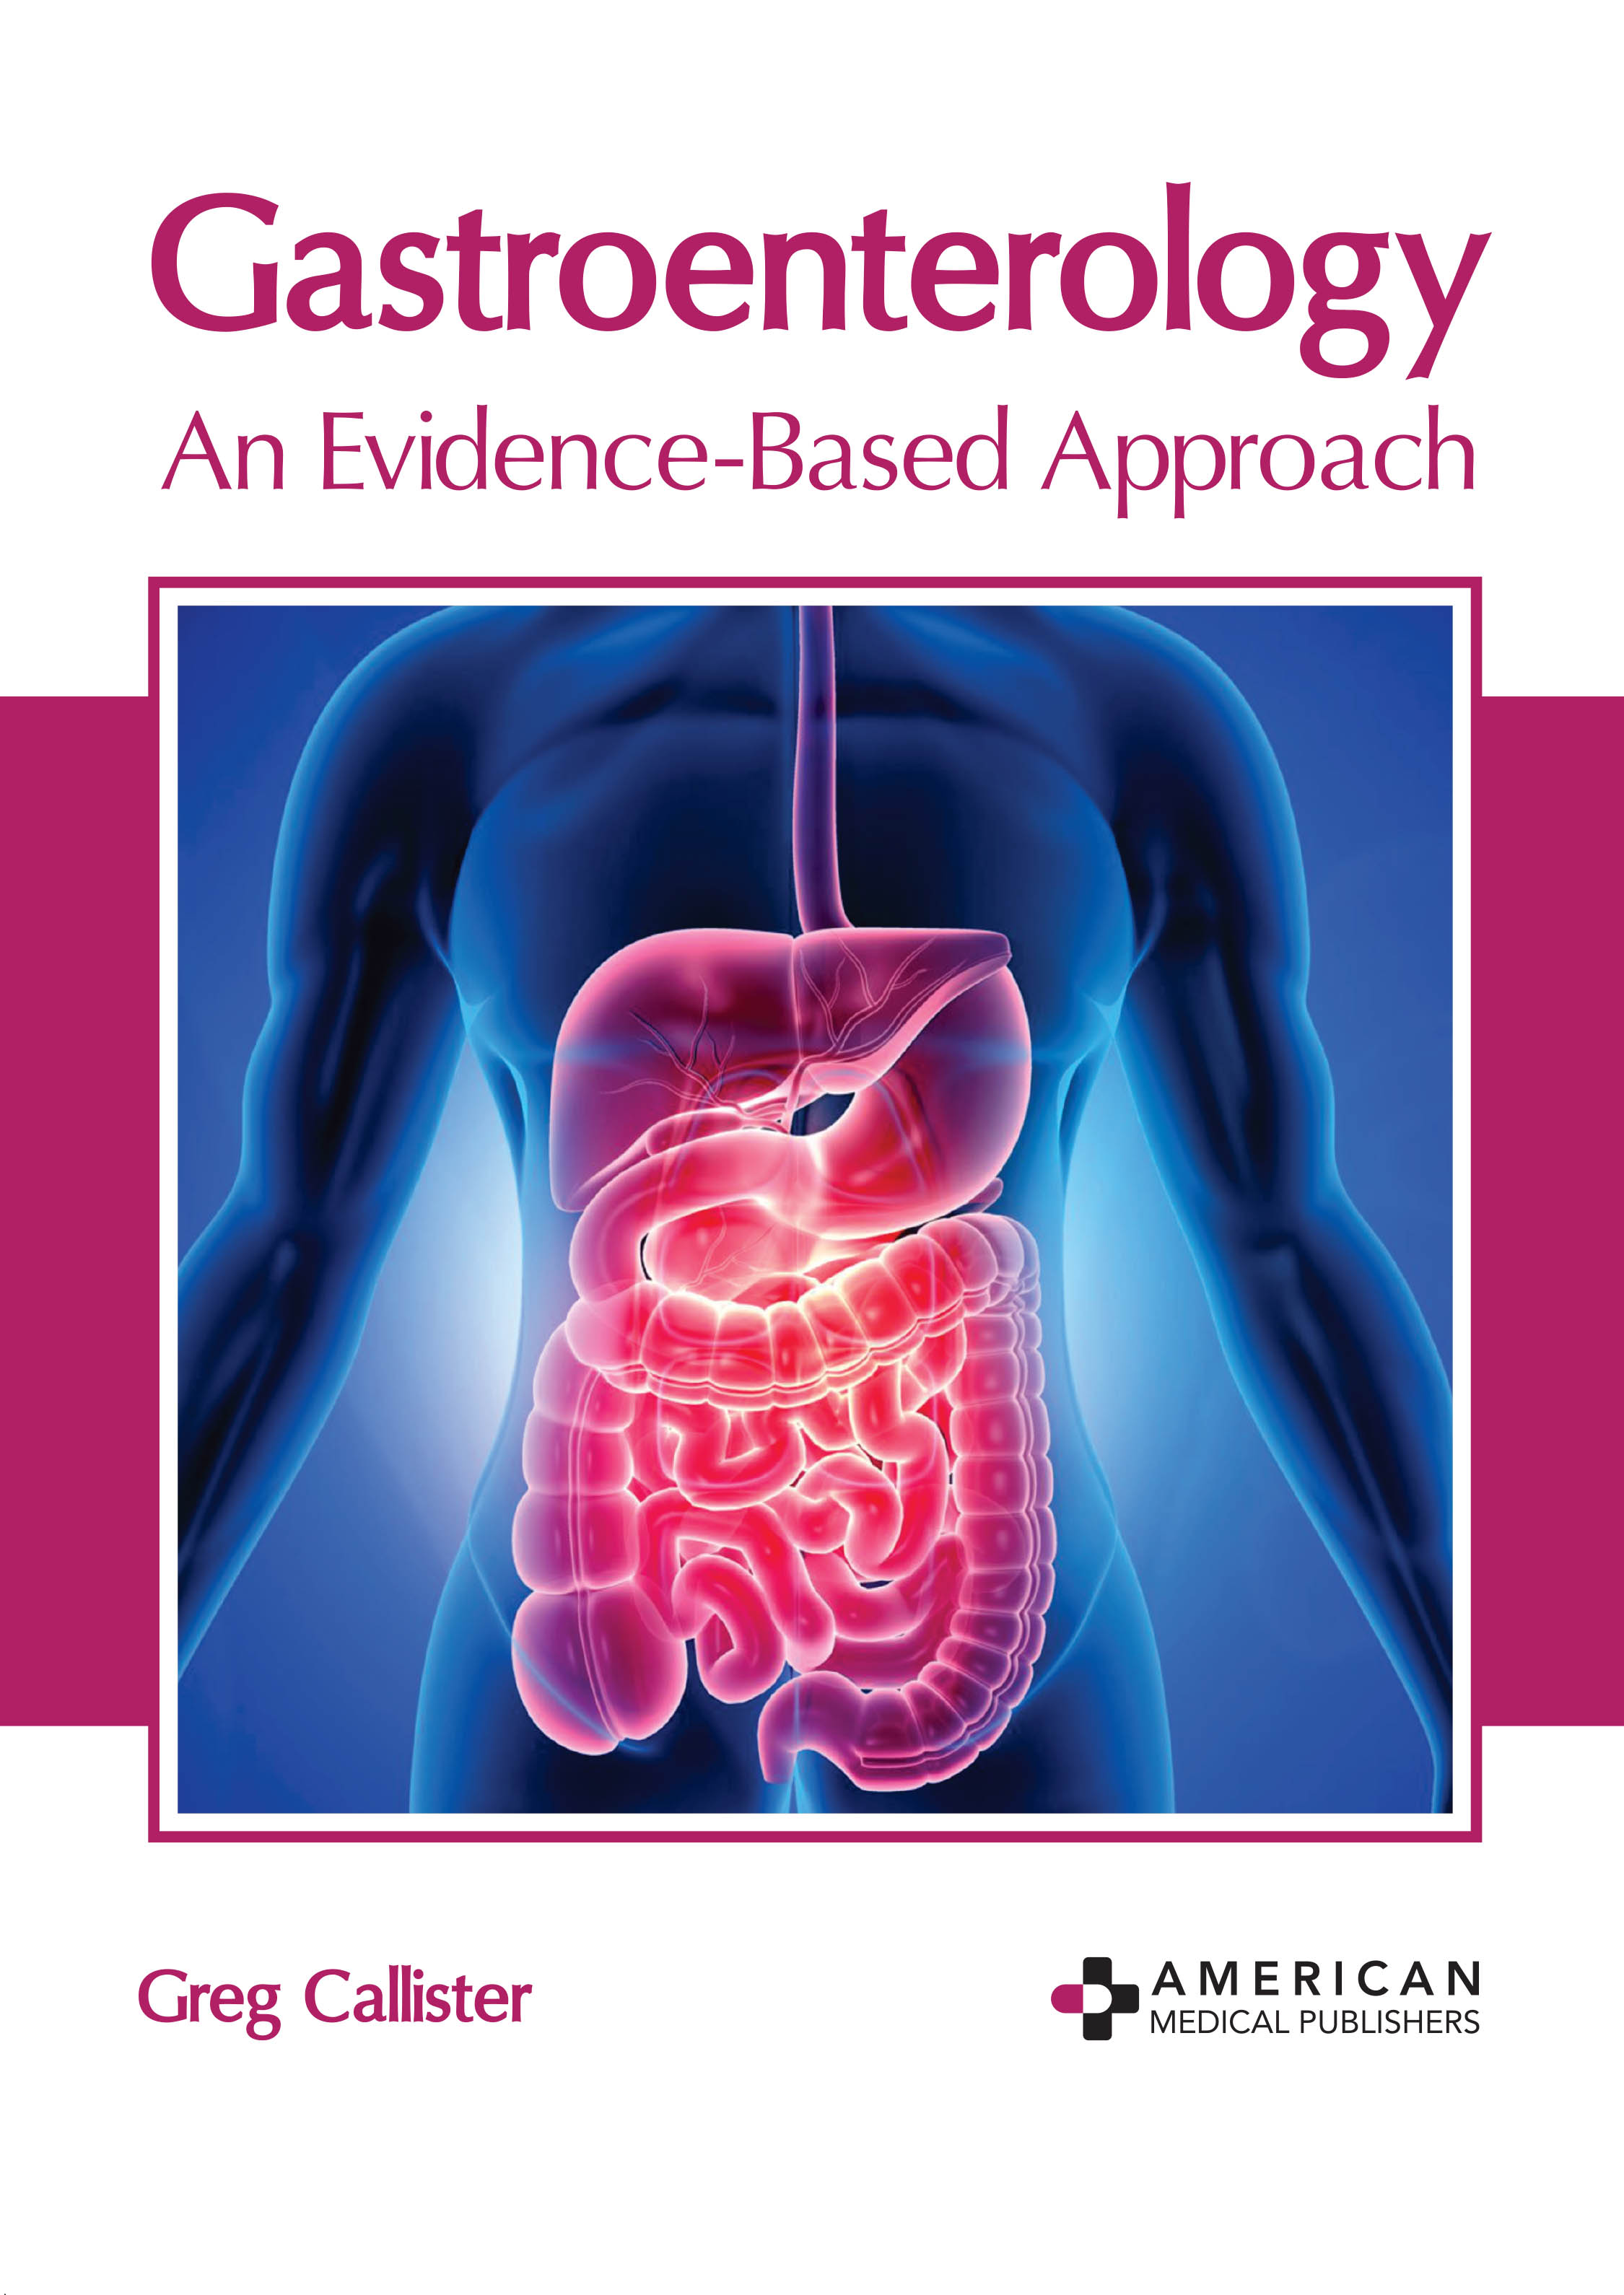 exclusive-publishers/american-medical-publishers/gastroenterology-an-evidence-based-approach-9781639271399